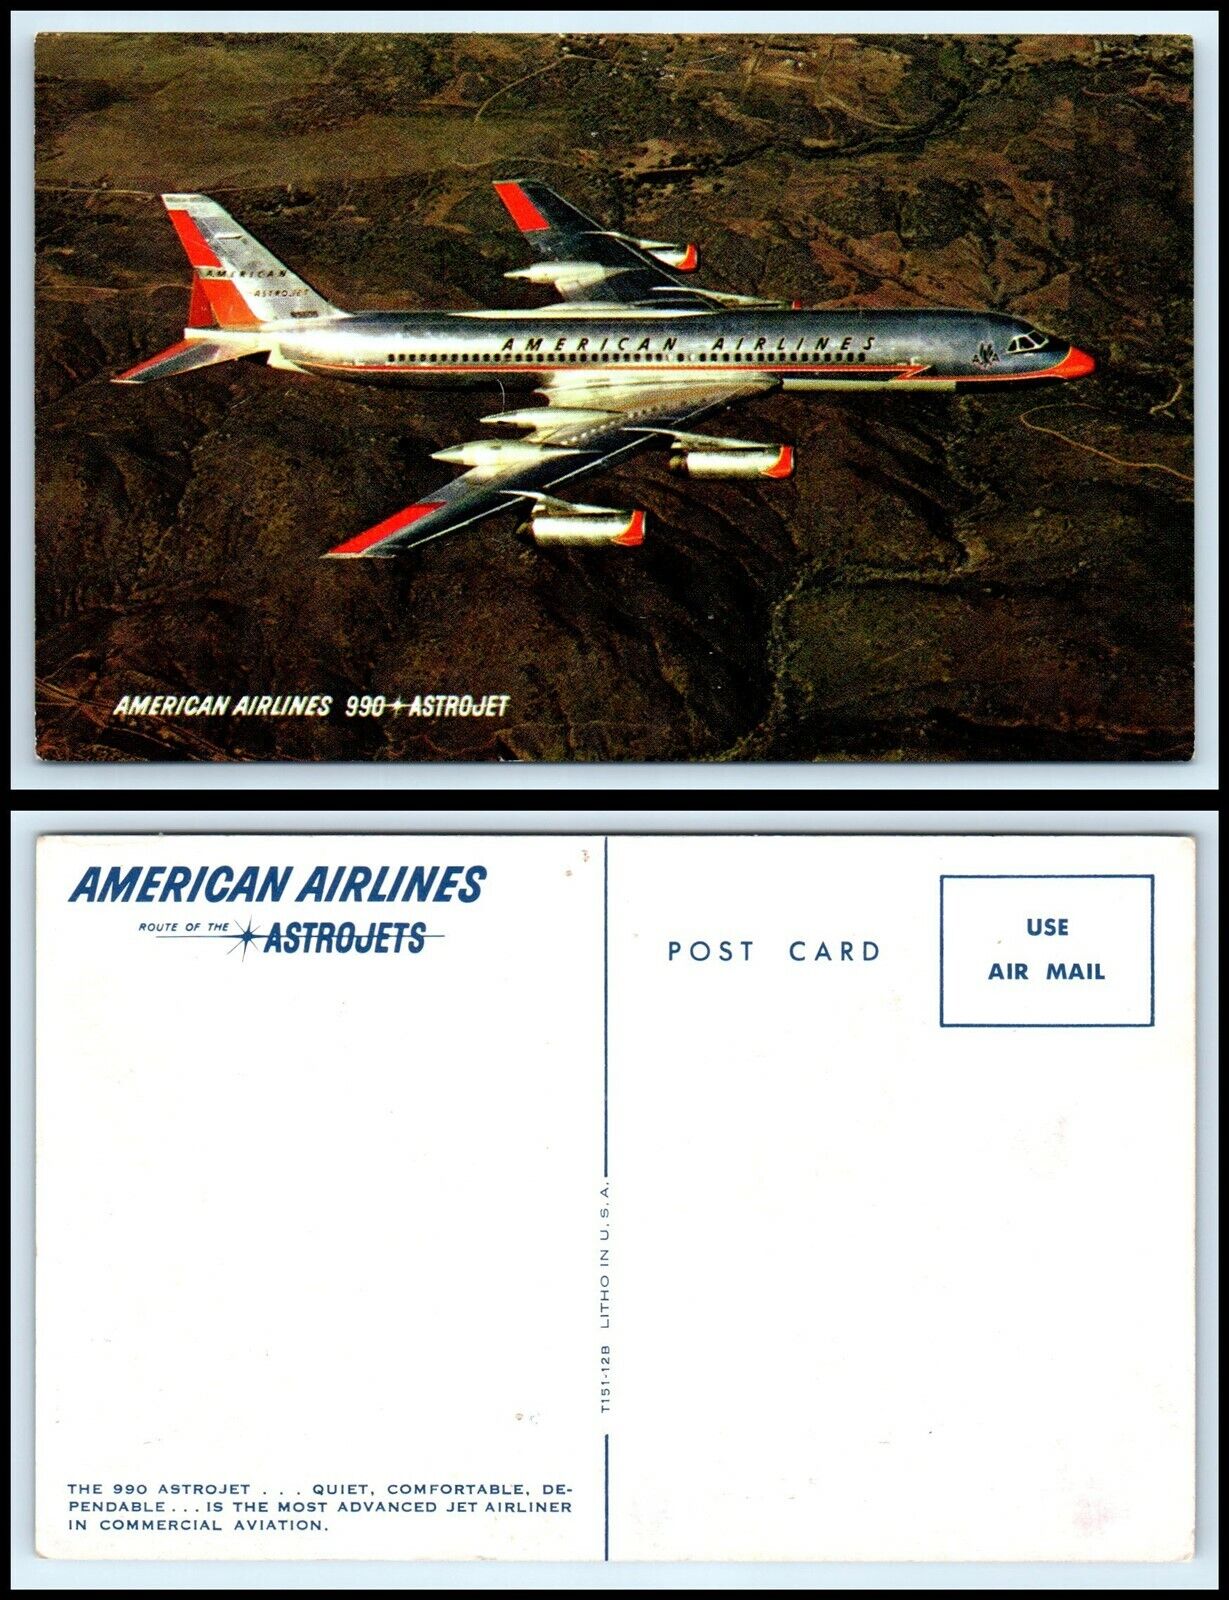 Vintage Aircraft / Airplane Postcard - American Airlines 990 Astrojet N46